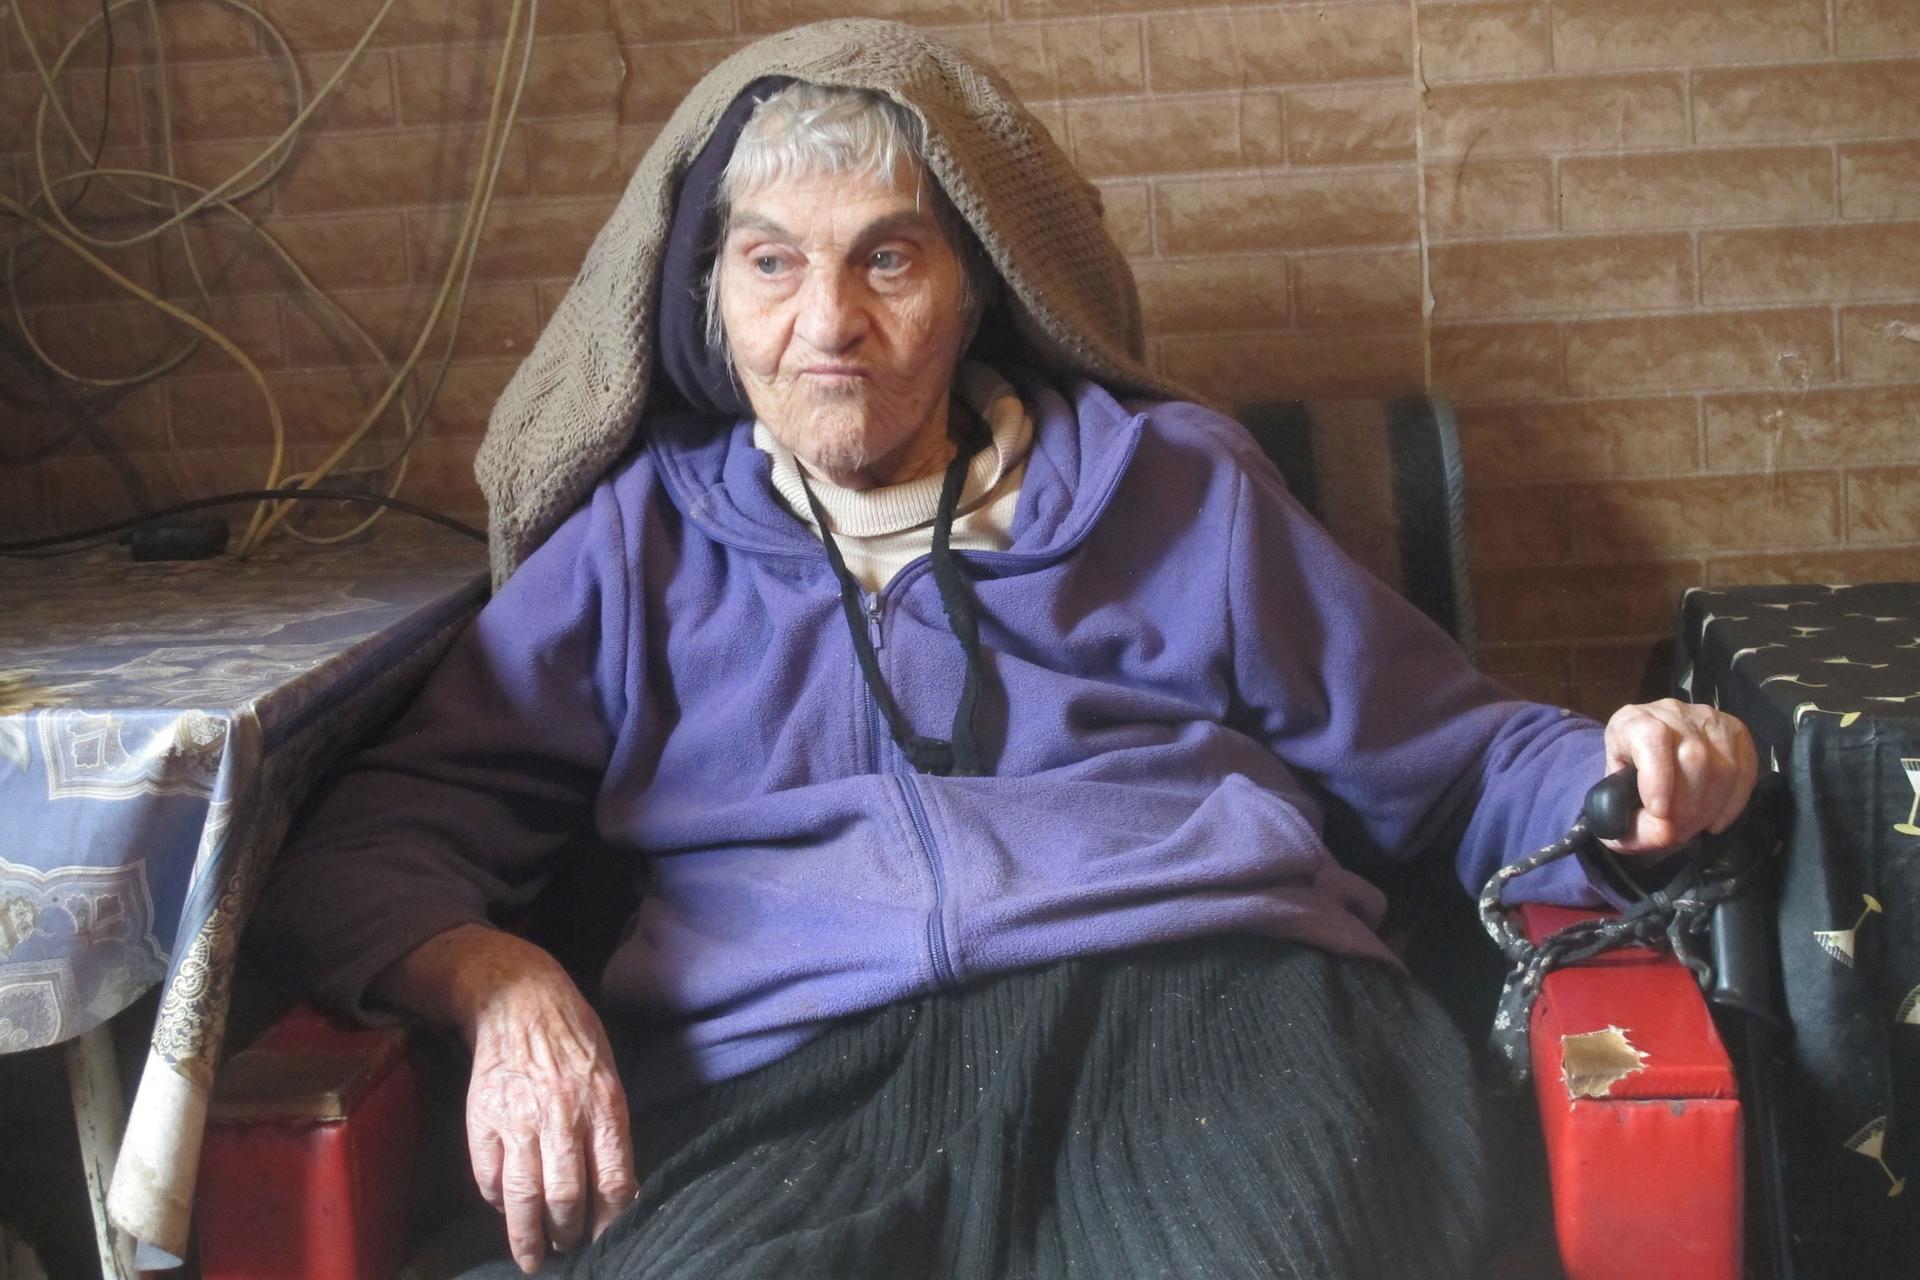 Tamara Sarria, 87, fled war in Abkhazia in 1992 when the region tried to separate from Georgia and has lived in a neglected sanatorium in Tskaltubo for the last three decades.